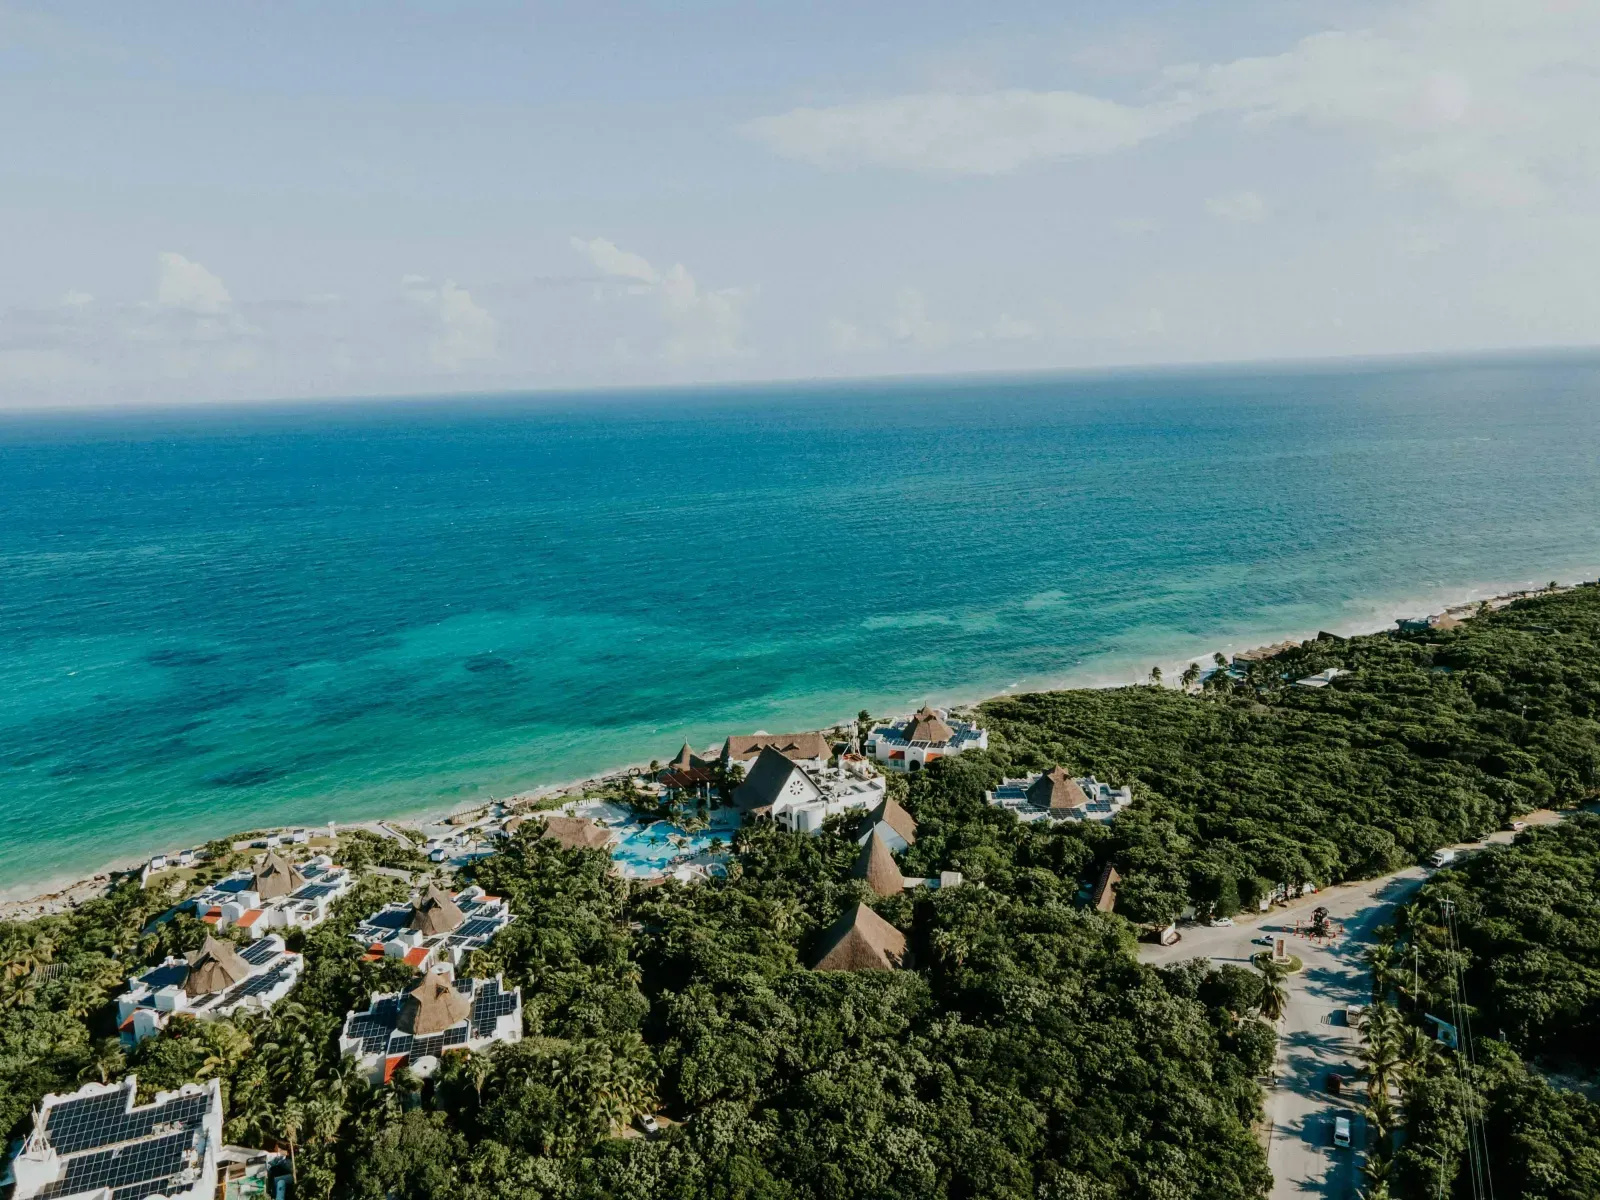 Tulum seen from above